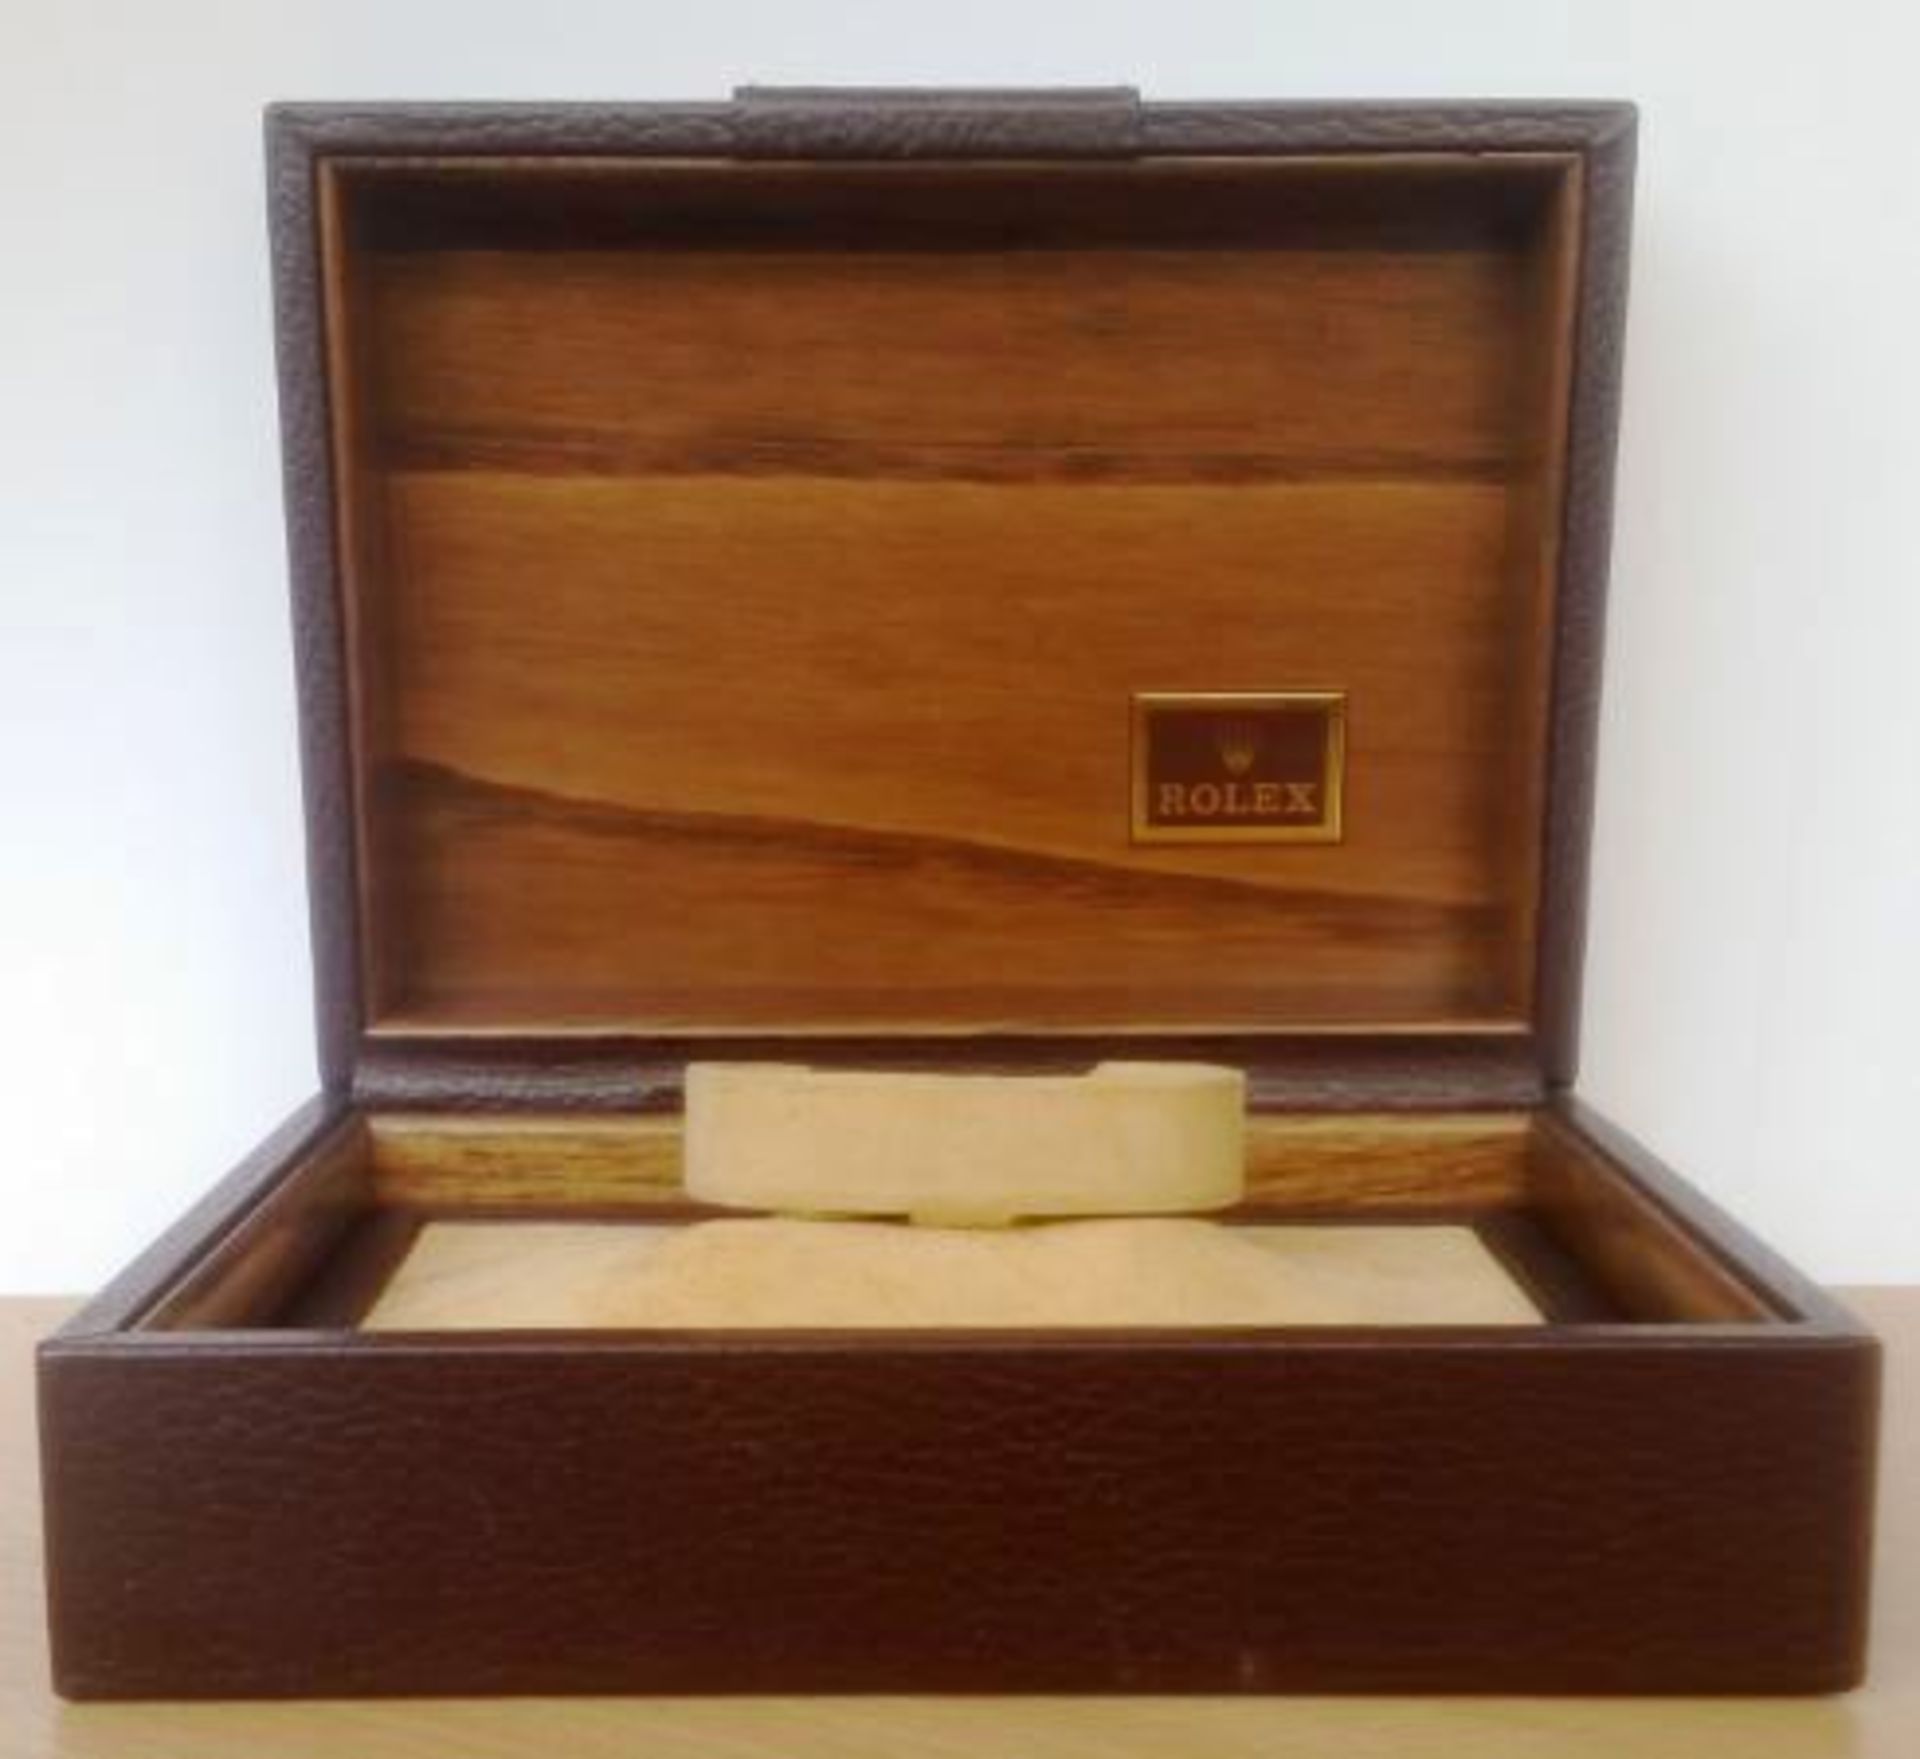 Rolex Brown Leather Presentation Watch Box - Image 4 of 4